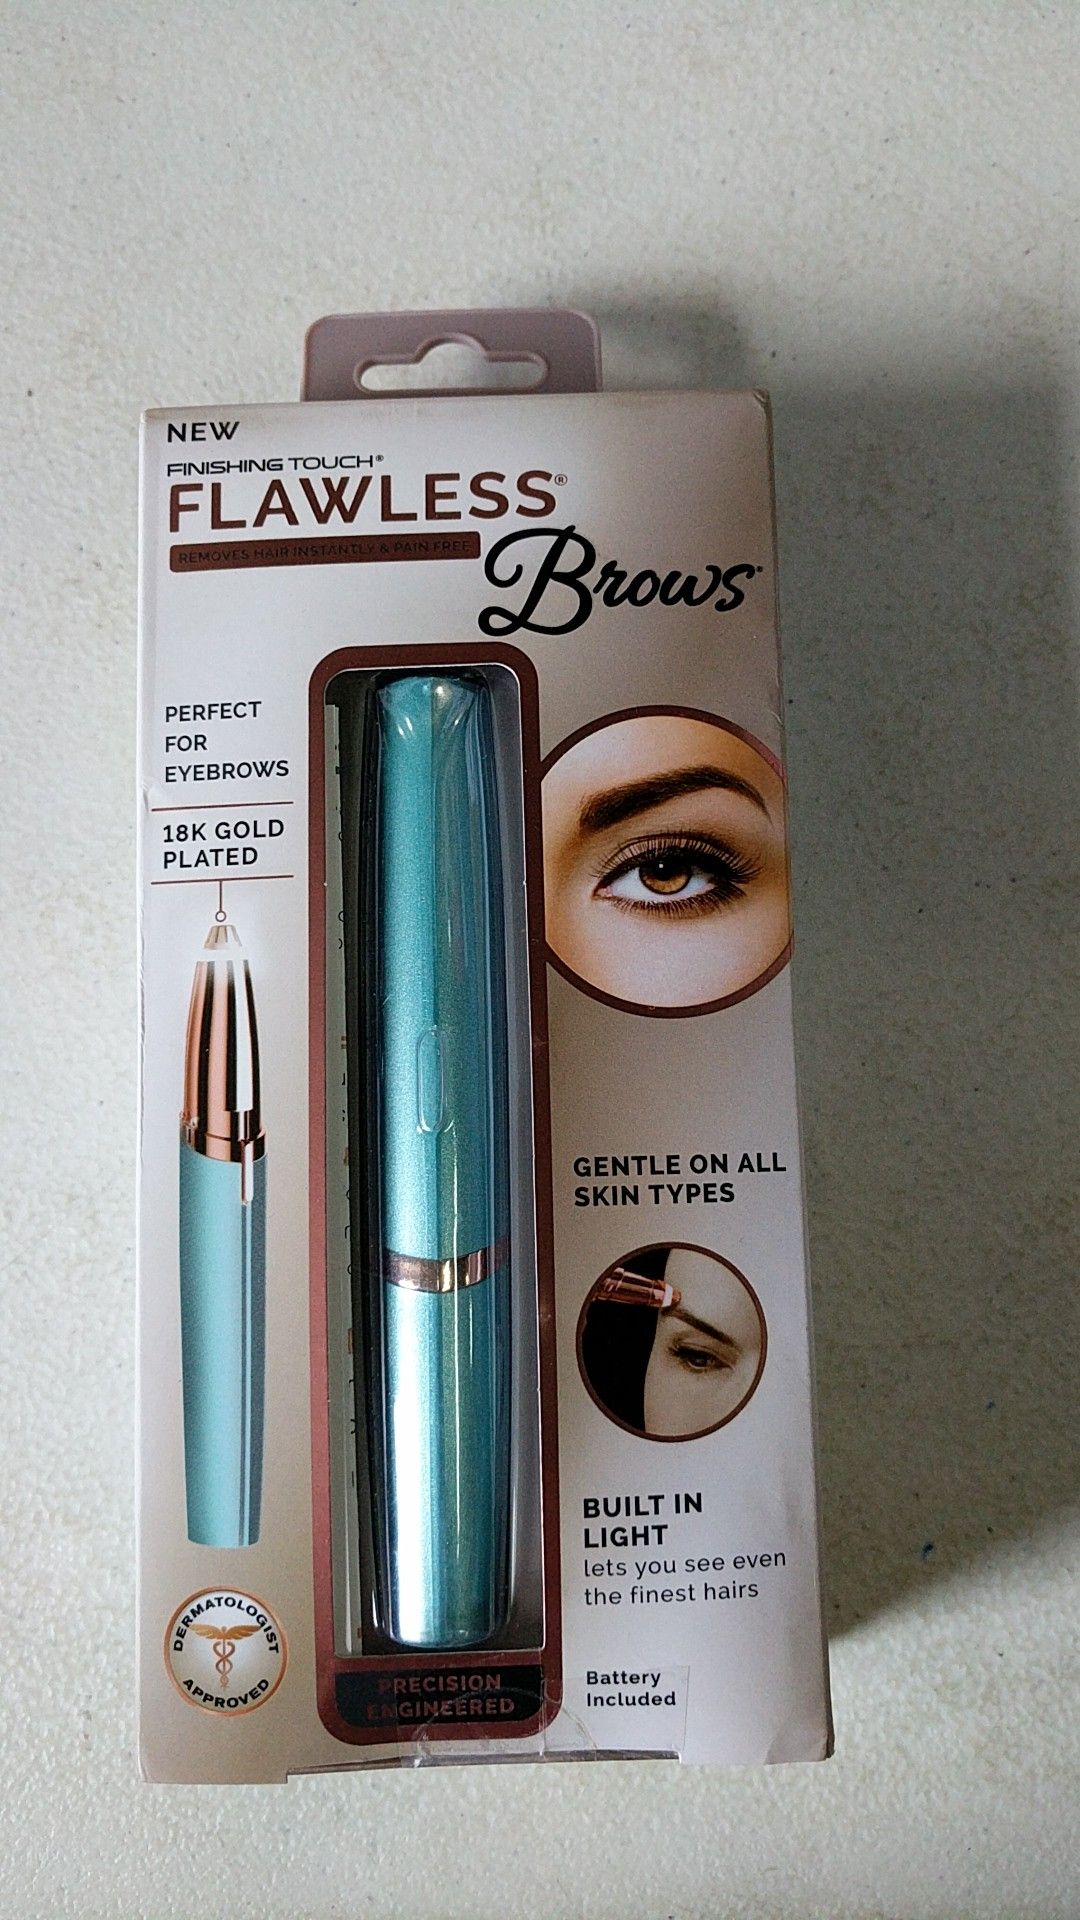 Flawless brows hair remover